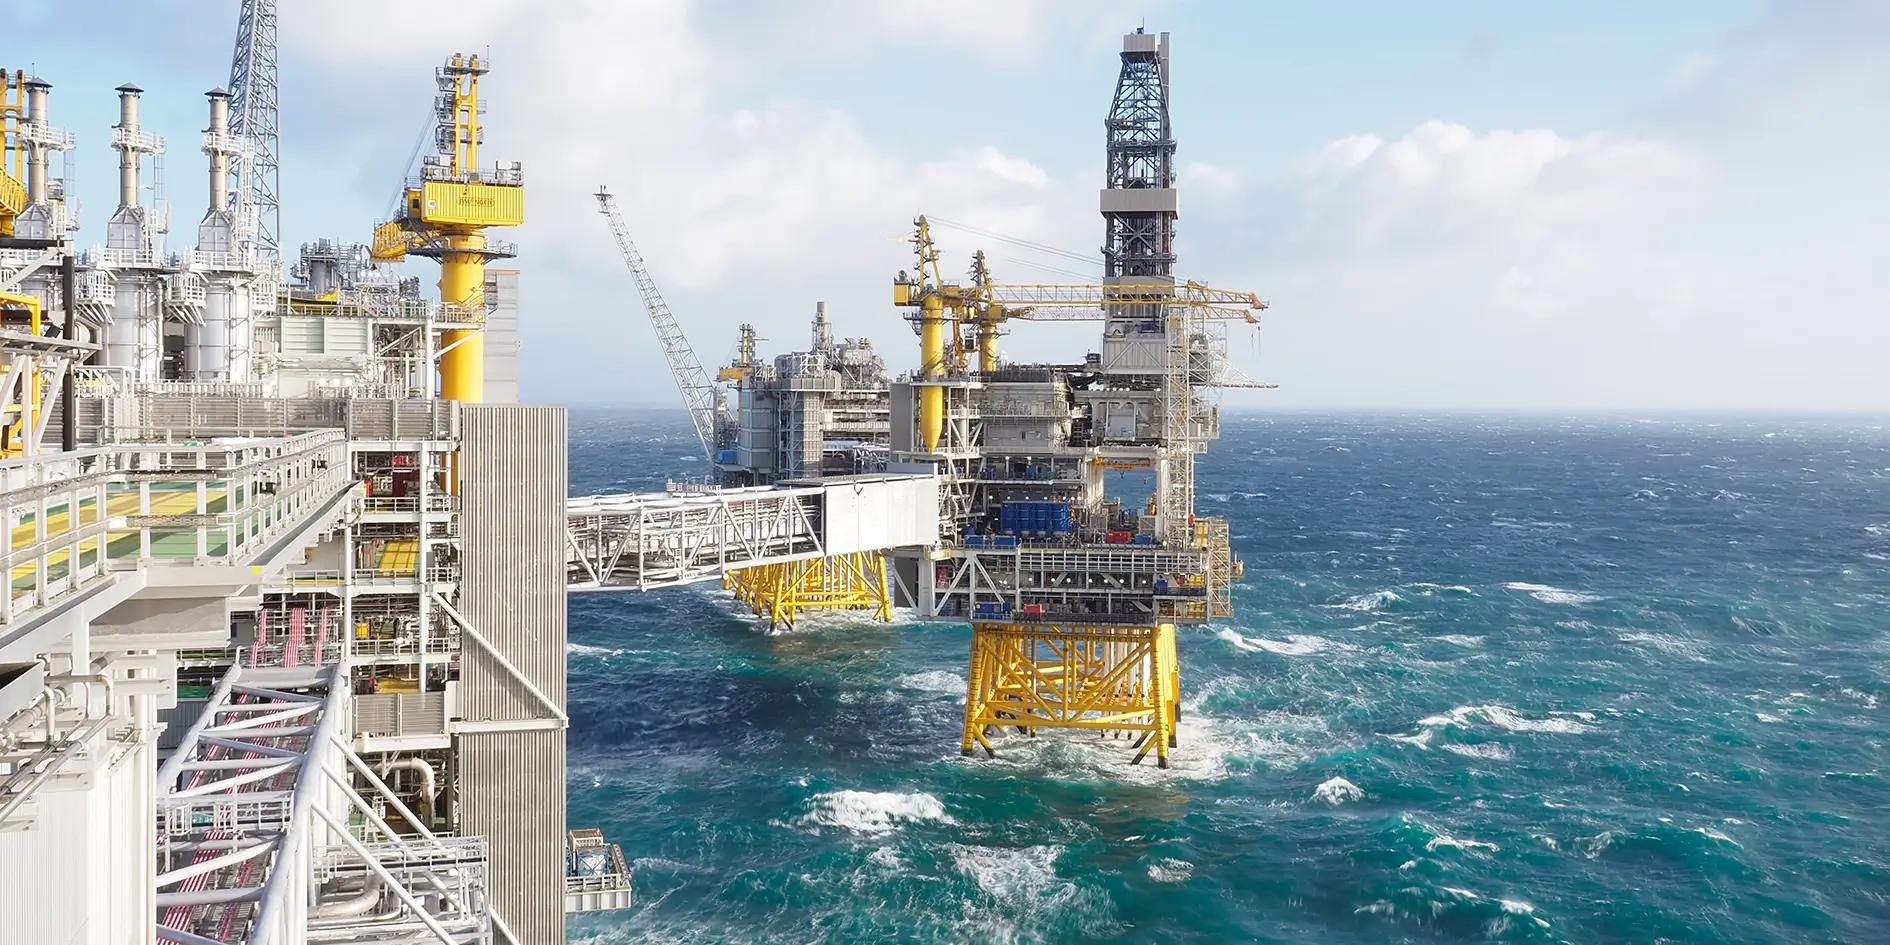 HVAC-R systems for offshore Rigs